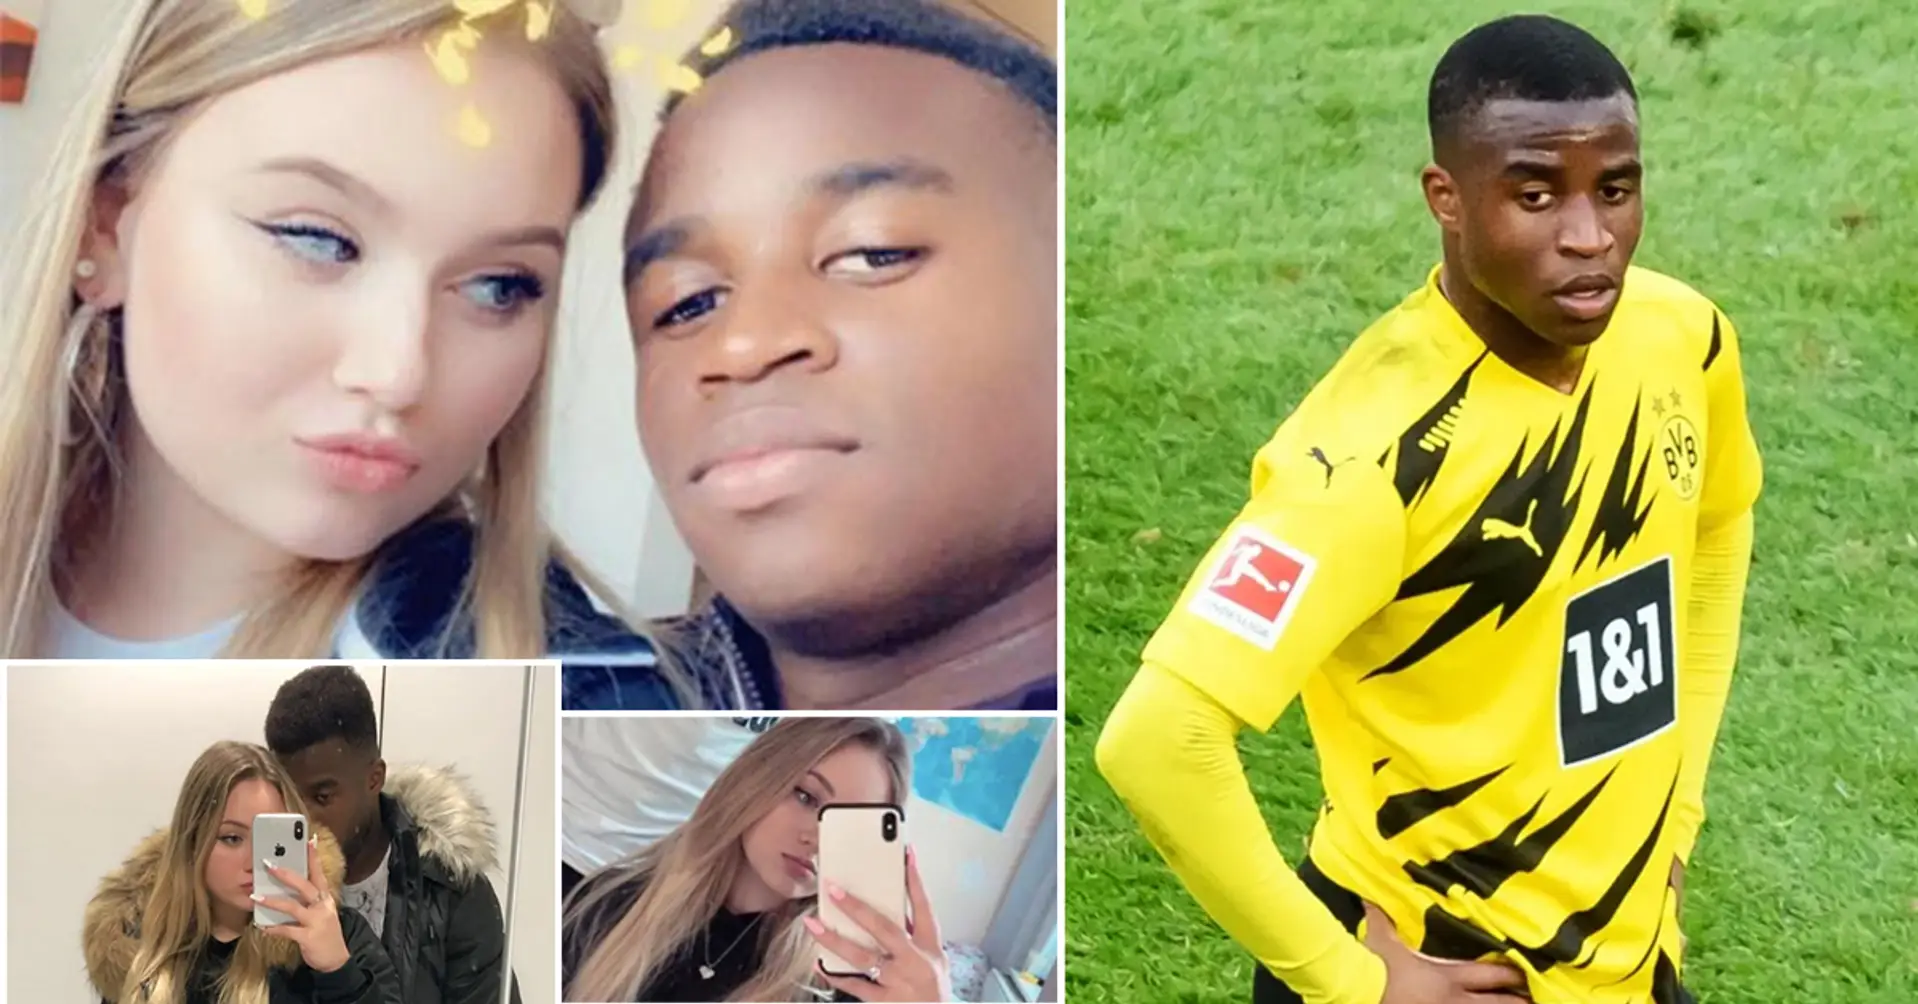 Revealed: Youssoufa Moukoko started dating 18-year-old girl when he was 12 years old